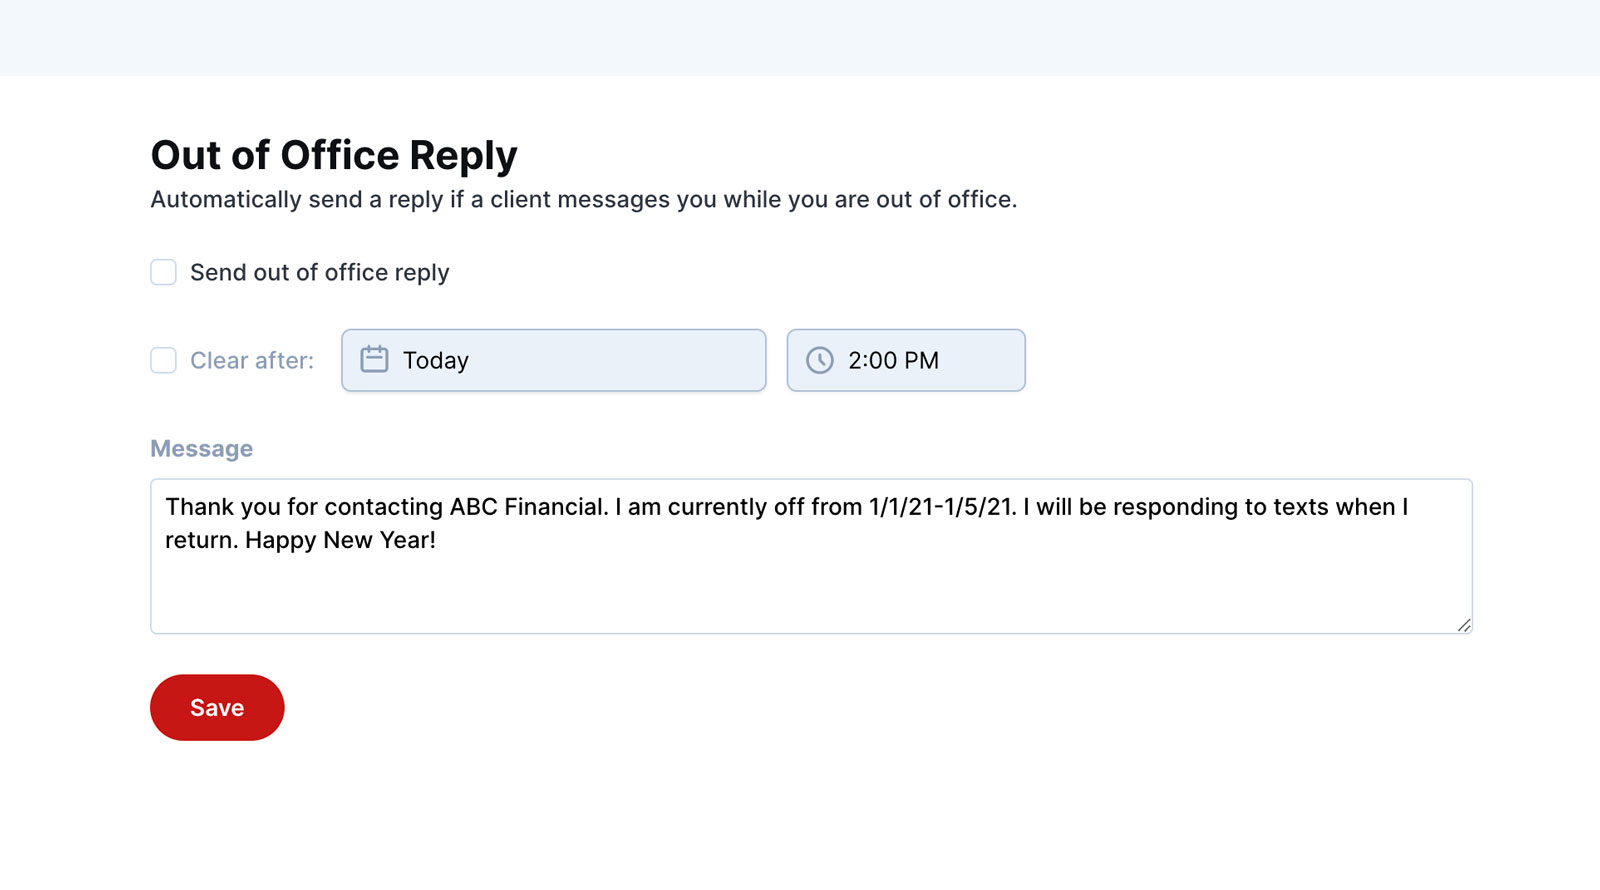 Speak out-of-office message interface